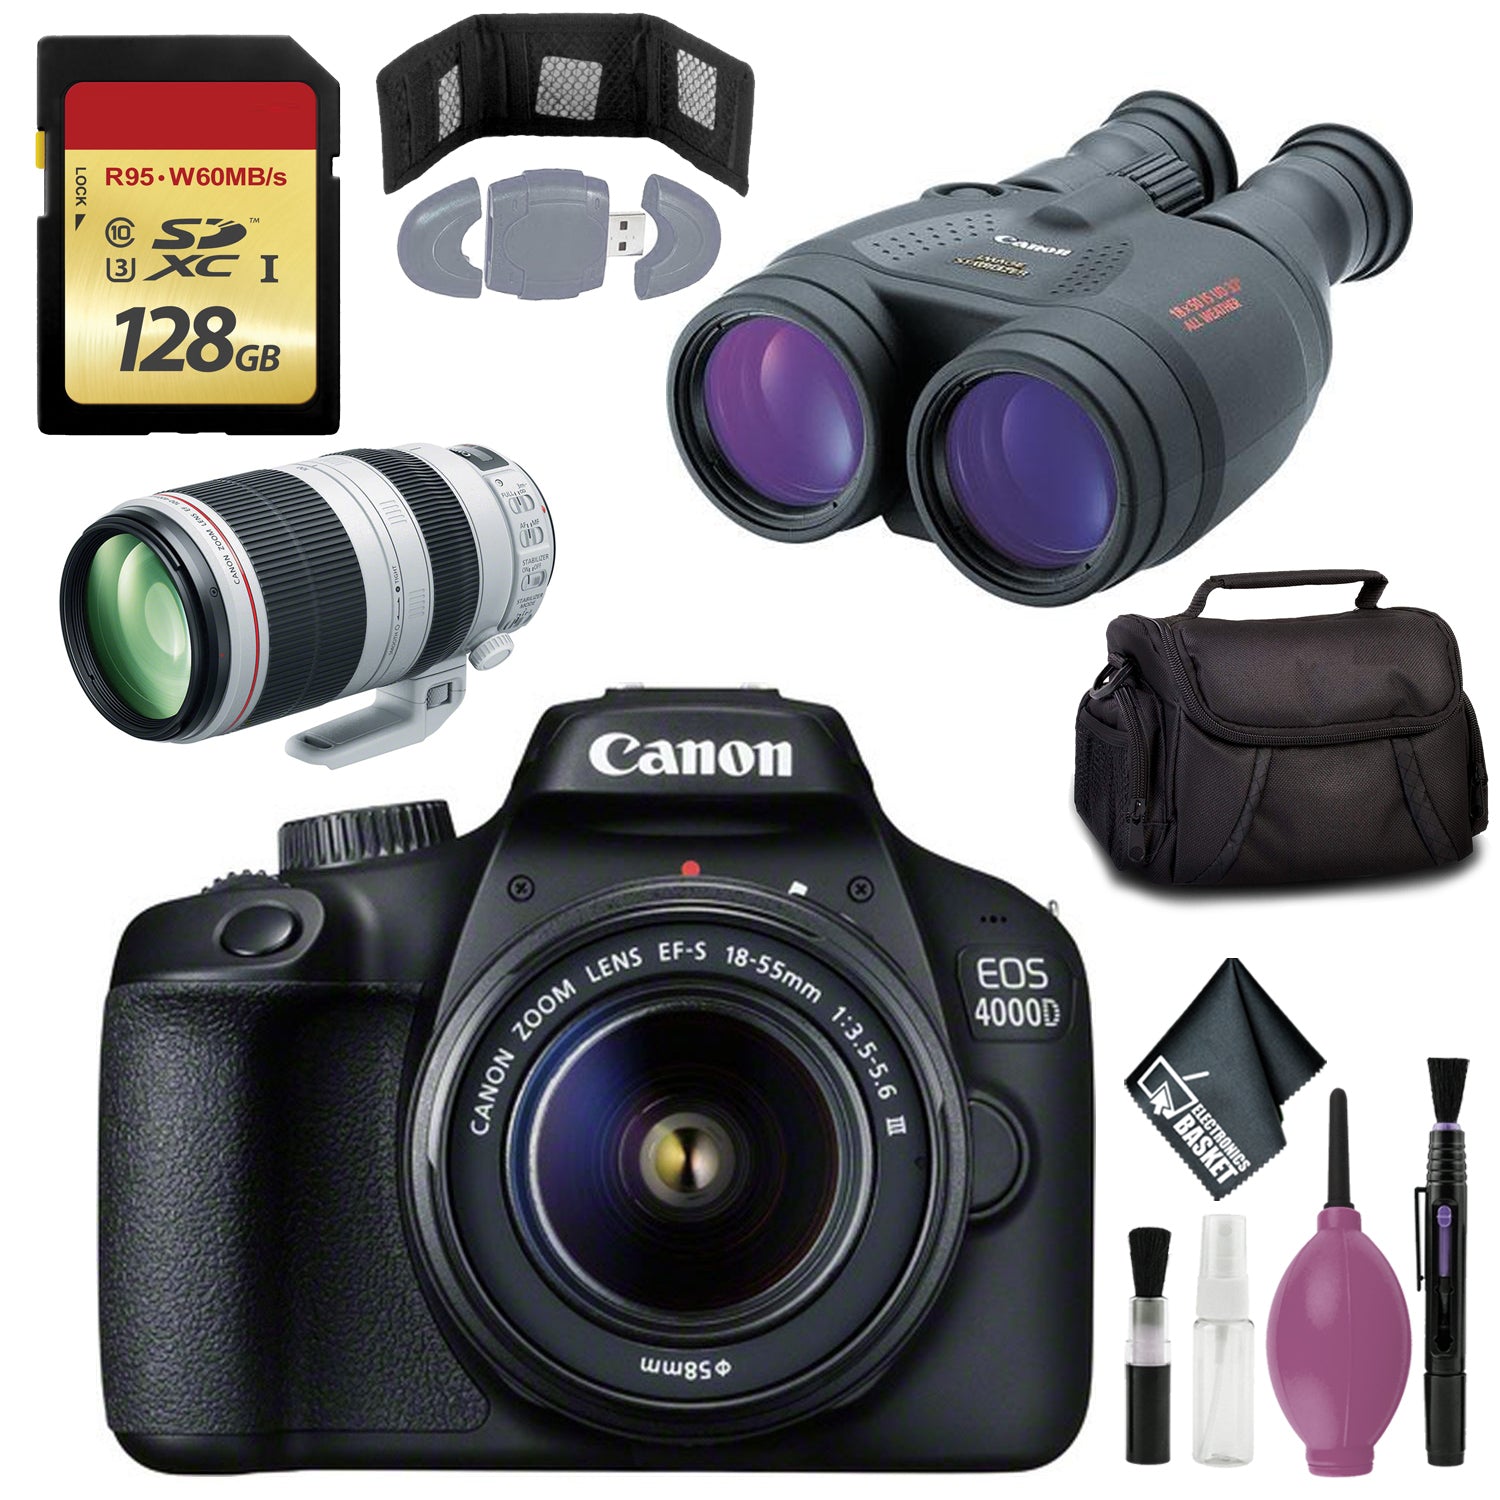 Canon 18x50 IS Image Stabilized Binocular - Eos 4000D with EF-S 18-55mm f/3.5-5.6 III Lens